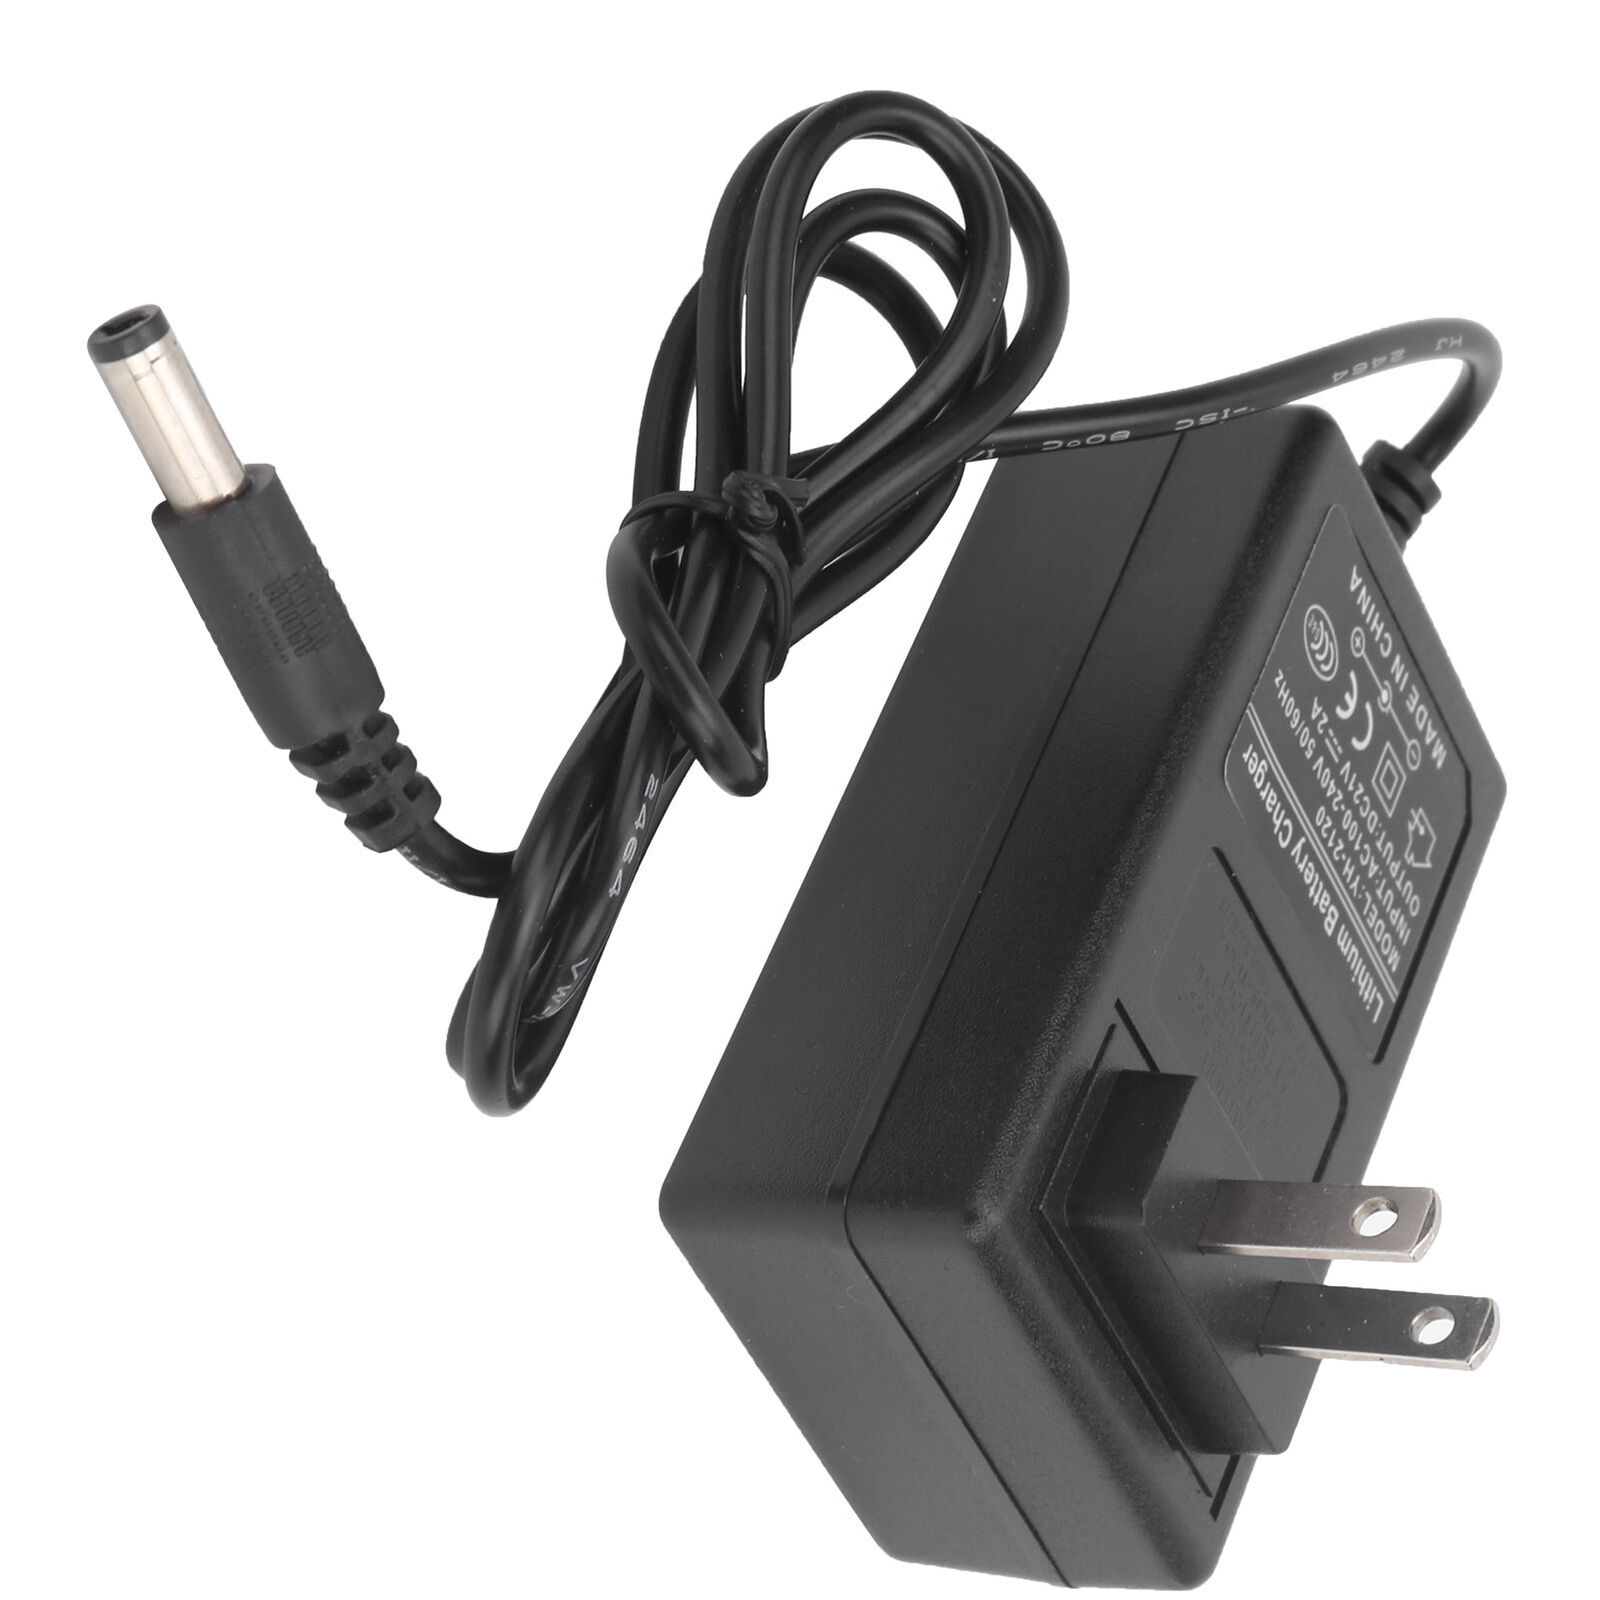 Remington HK28U-3.6-100 AC Adapter Power Supply Charger For PG-200 PG-250 PG-350 Type AC/AC Adapter Features Powered